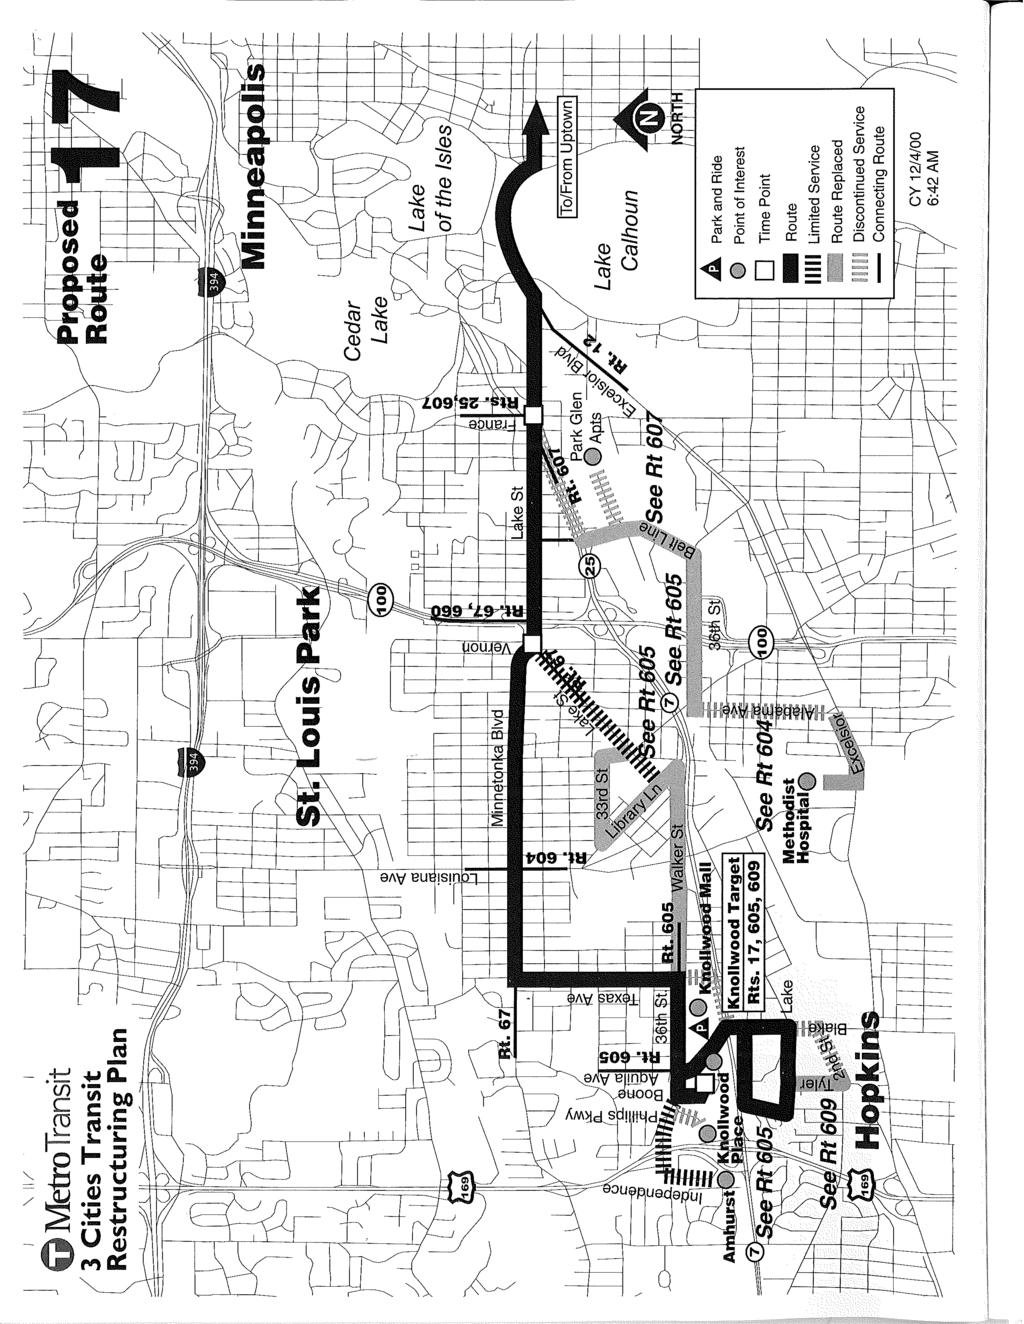 J '\ 11/ _ MetroTransit 3 Cities Transit Restructuring Plan Lake Calhoun A D _ 111I1 Park and Ride Point of